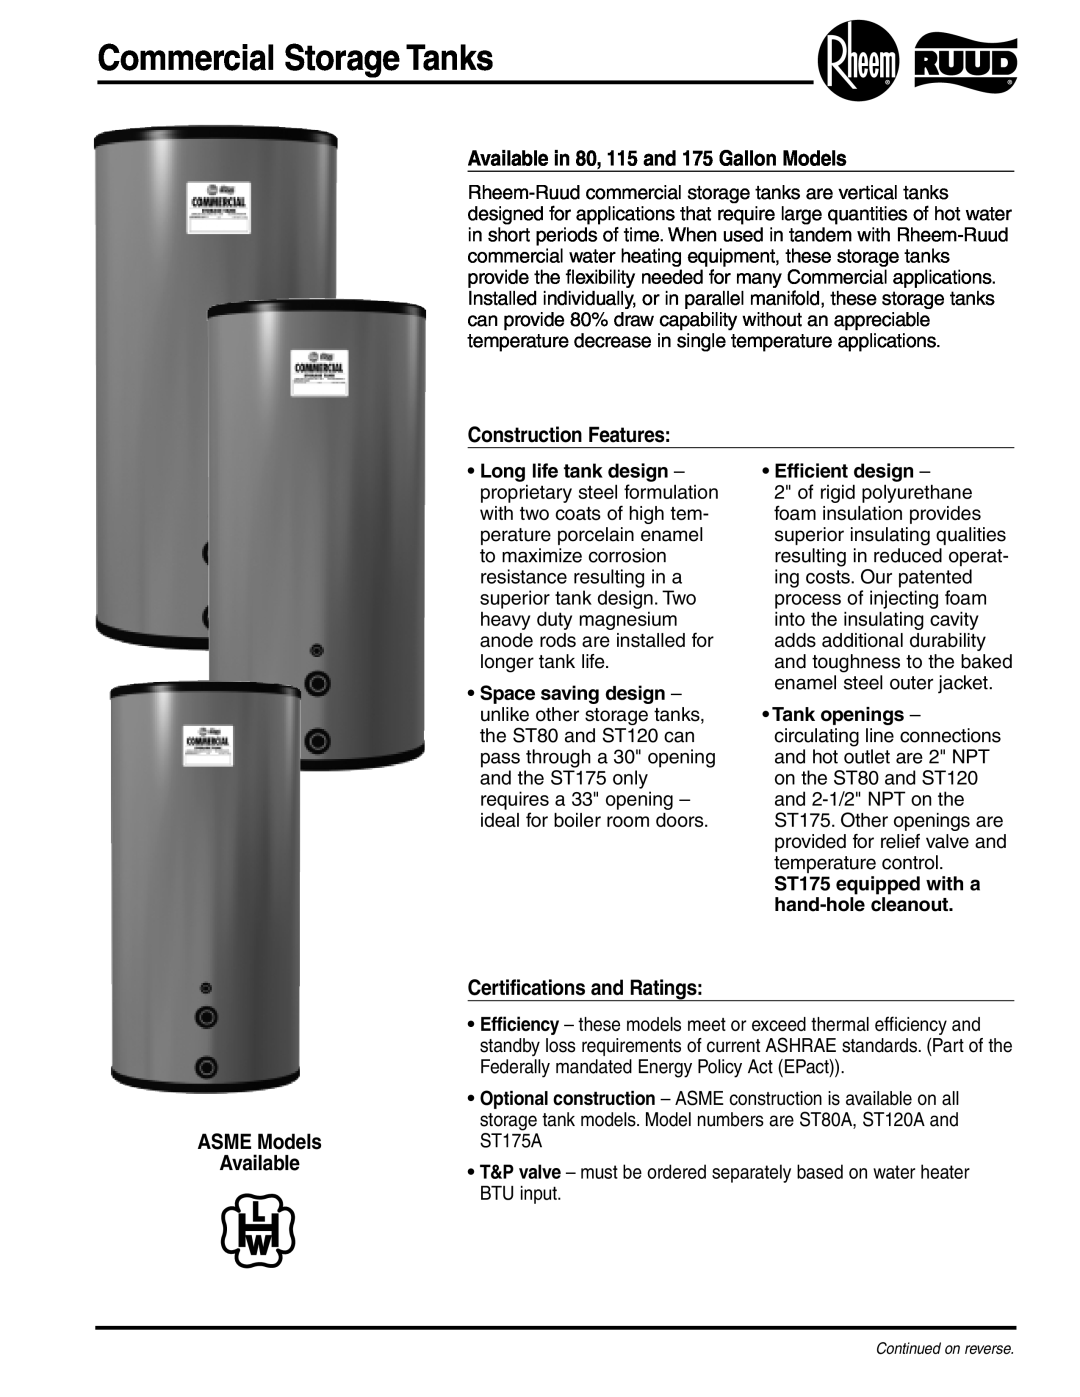 Rheem manual Available in 80, 115 and 175 Gallon Models, Construction Features, ASME Models Available 